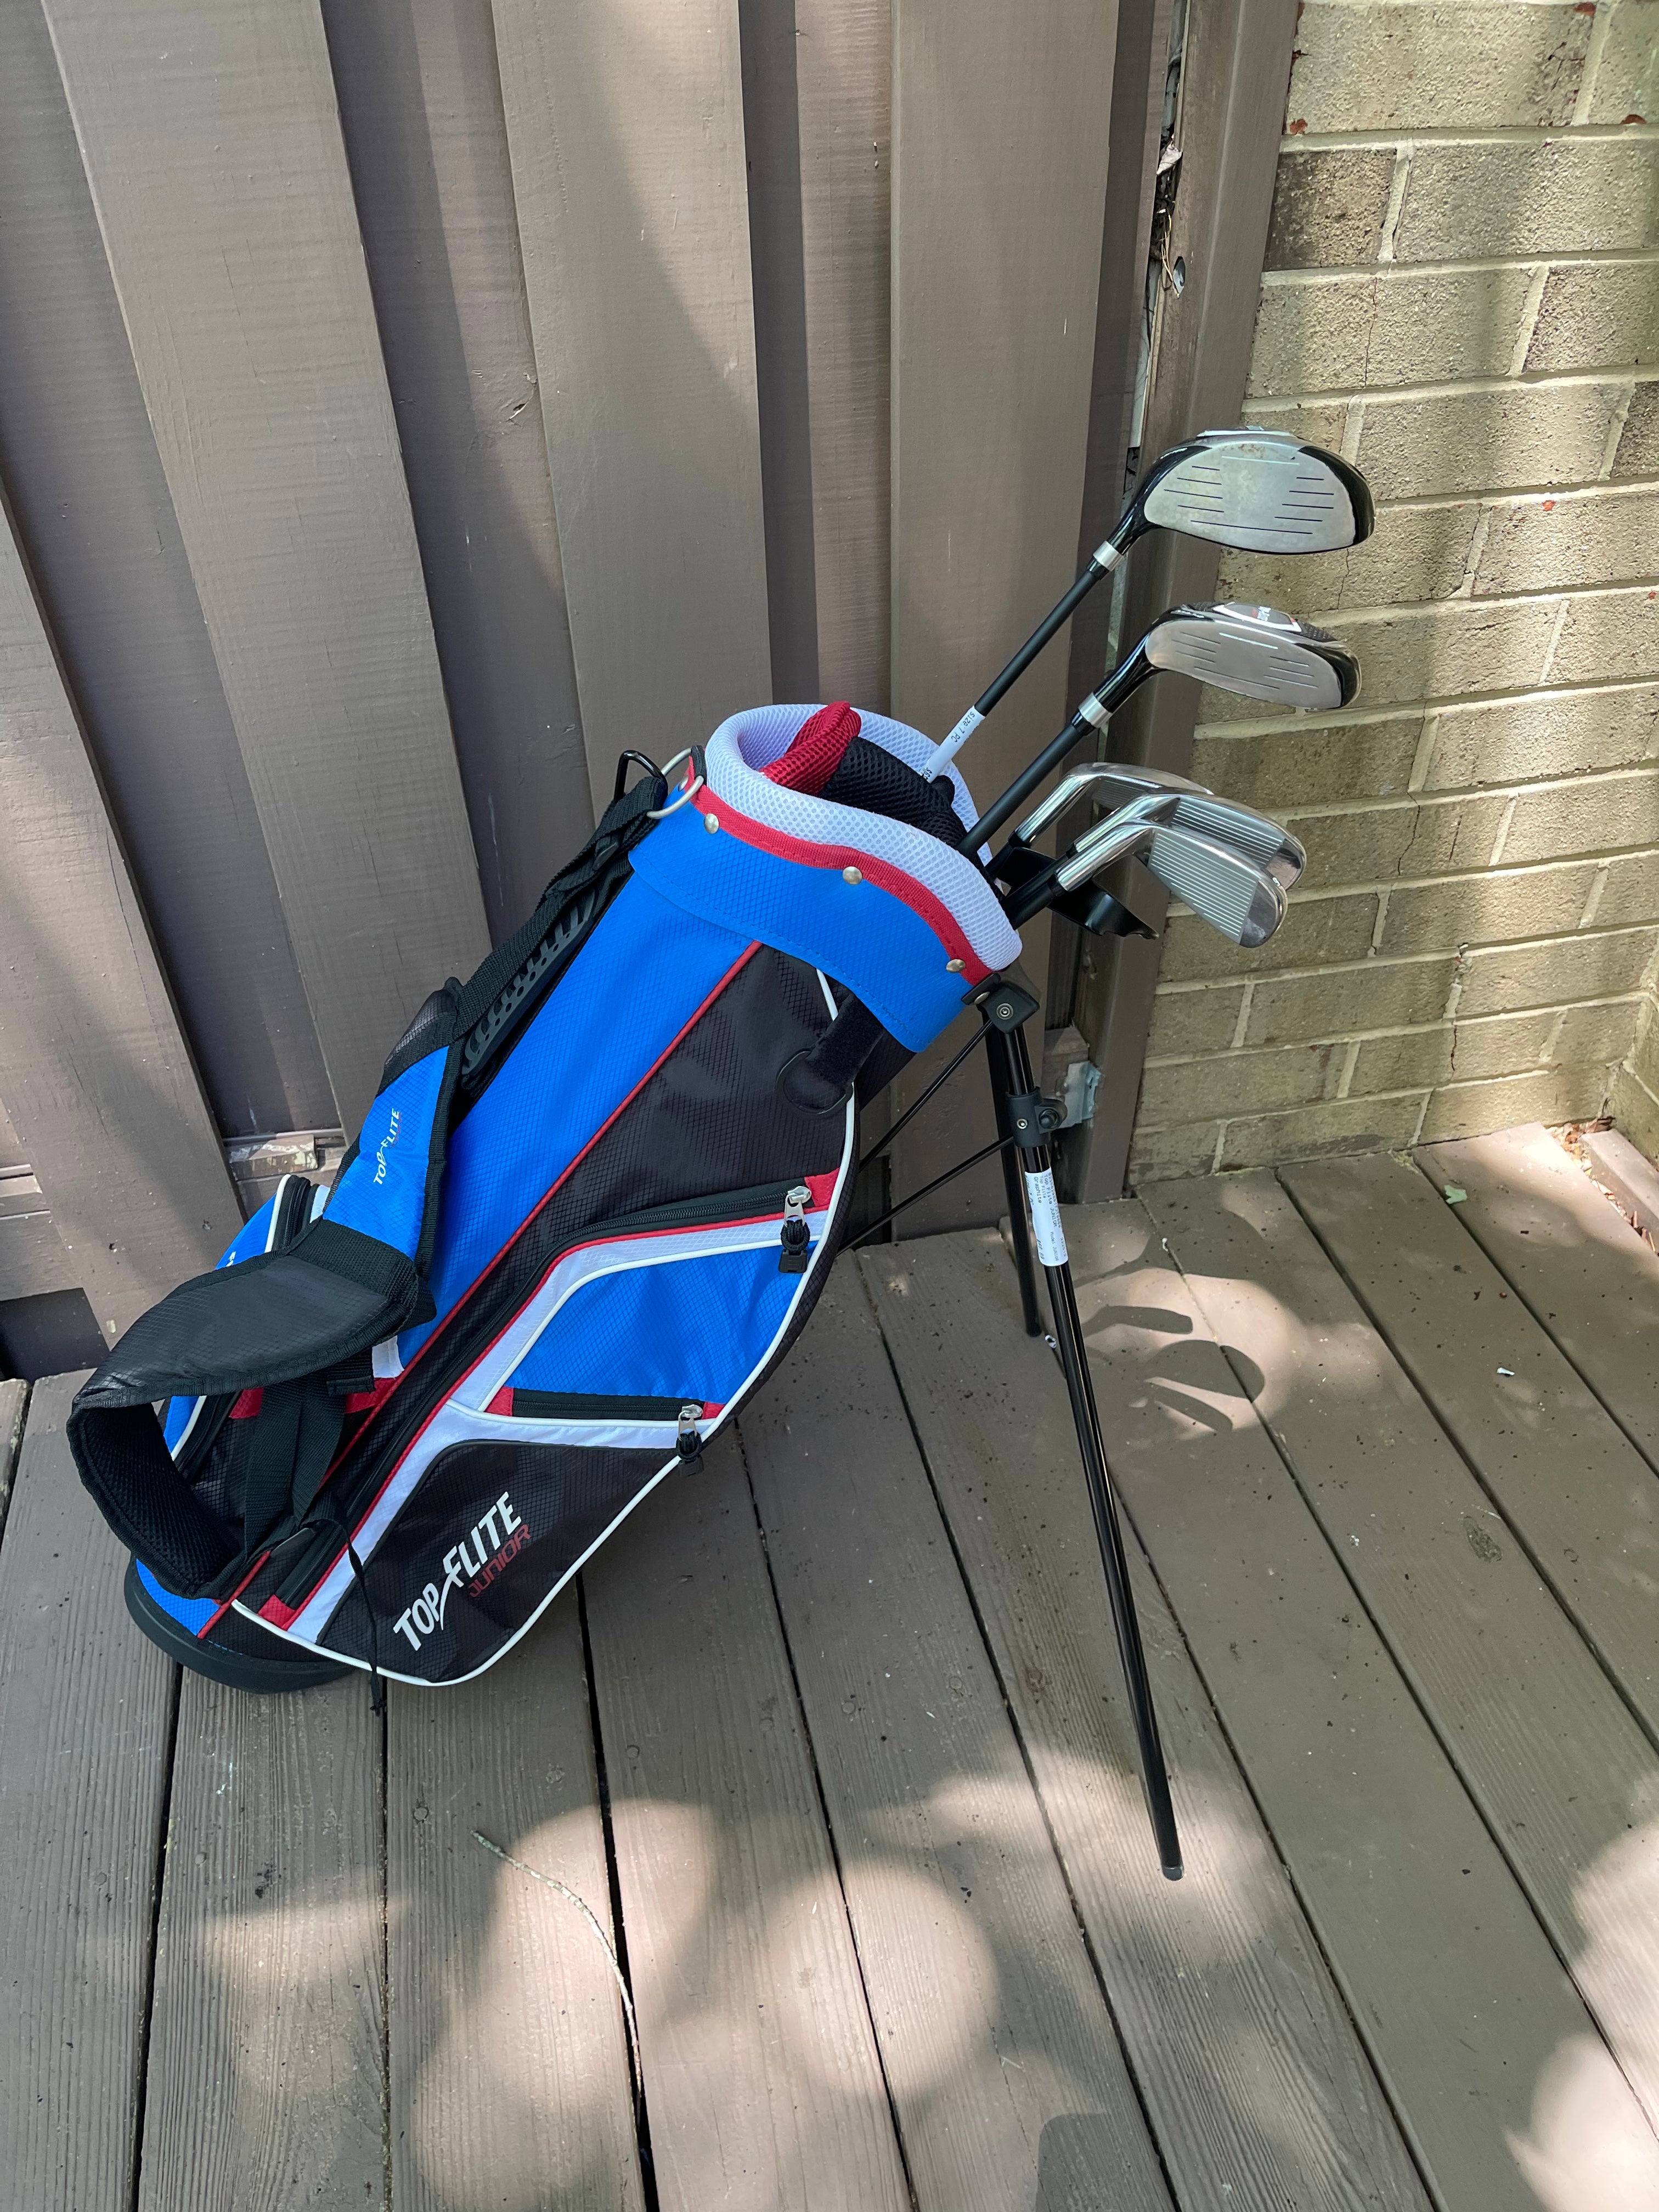 Best junior golf club sets: What to know when shopping for junior